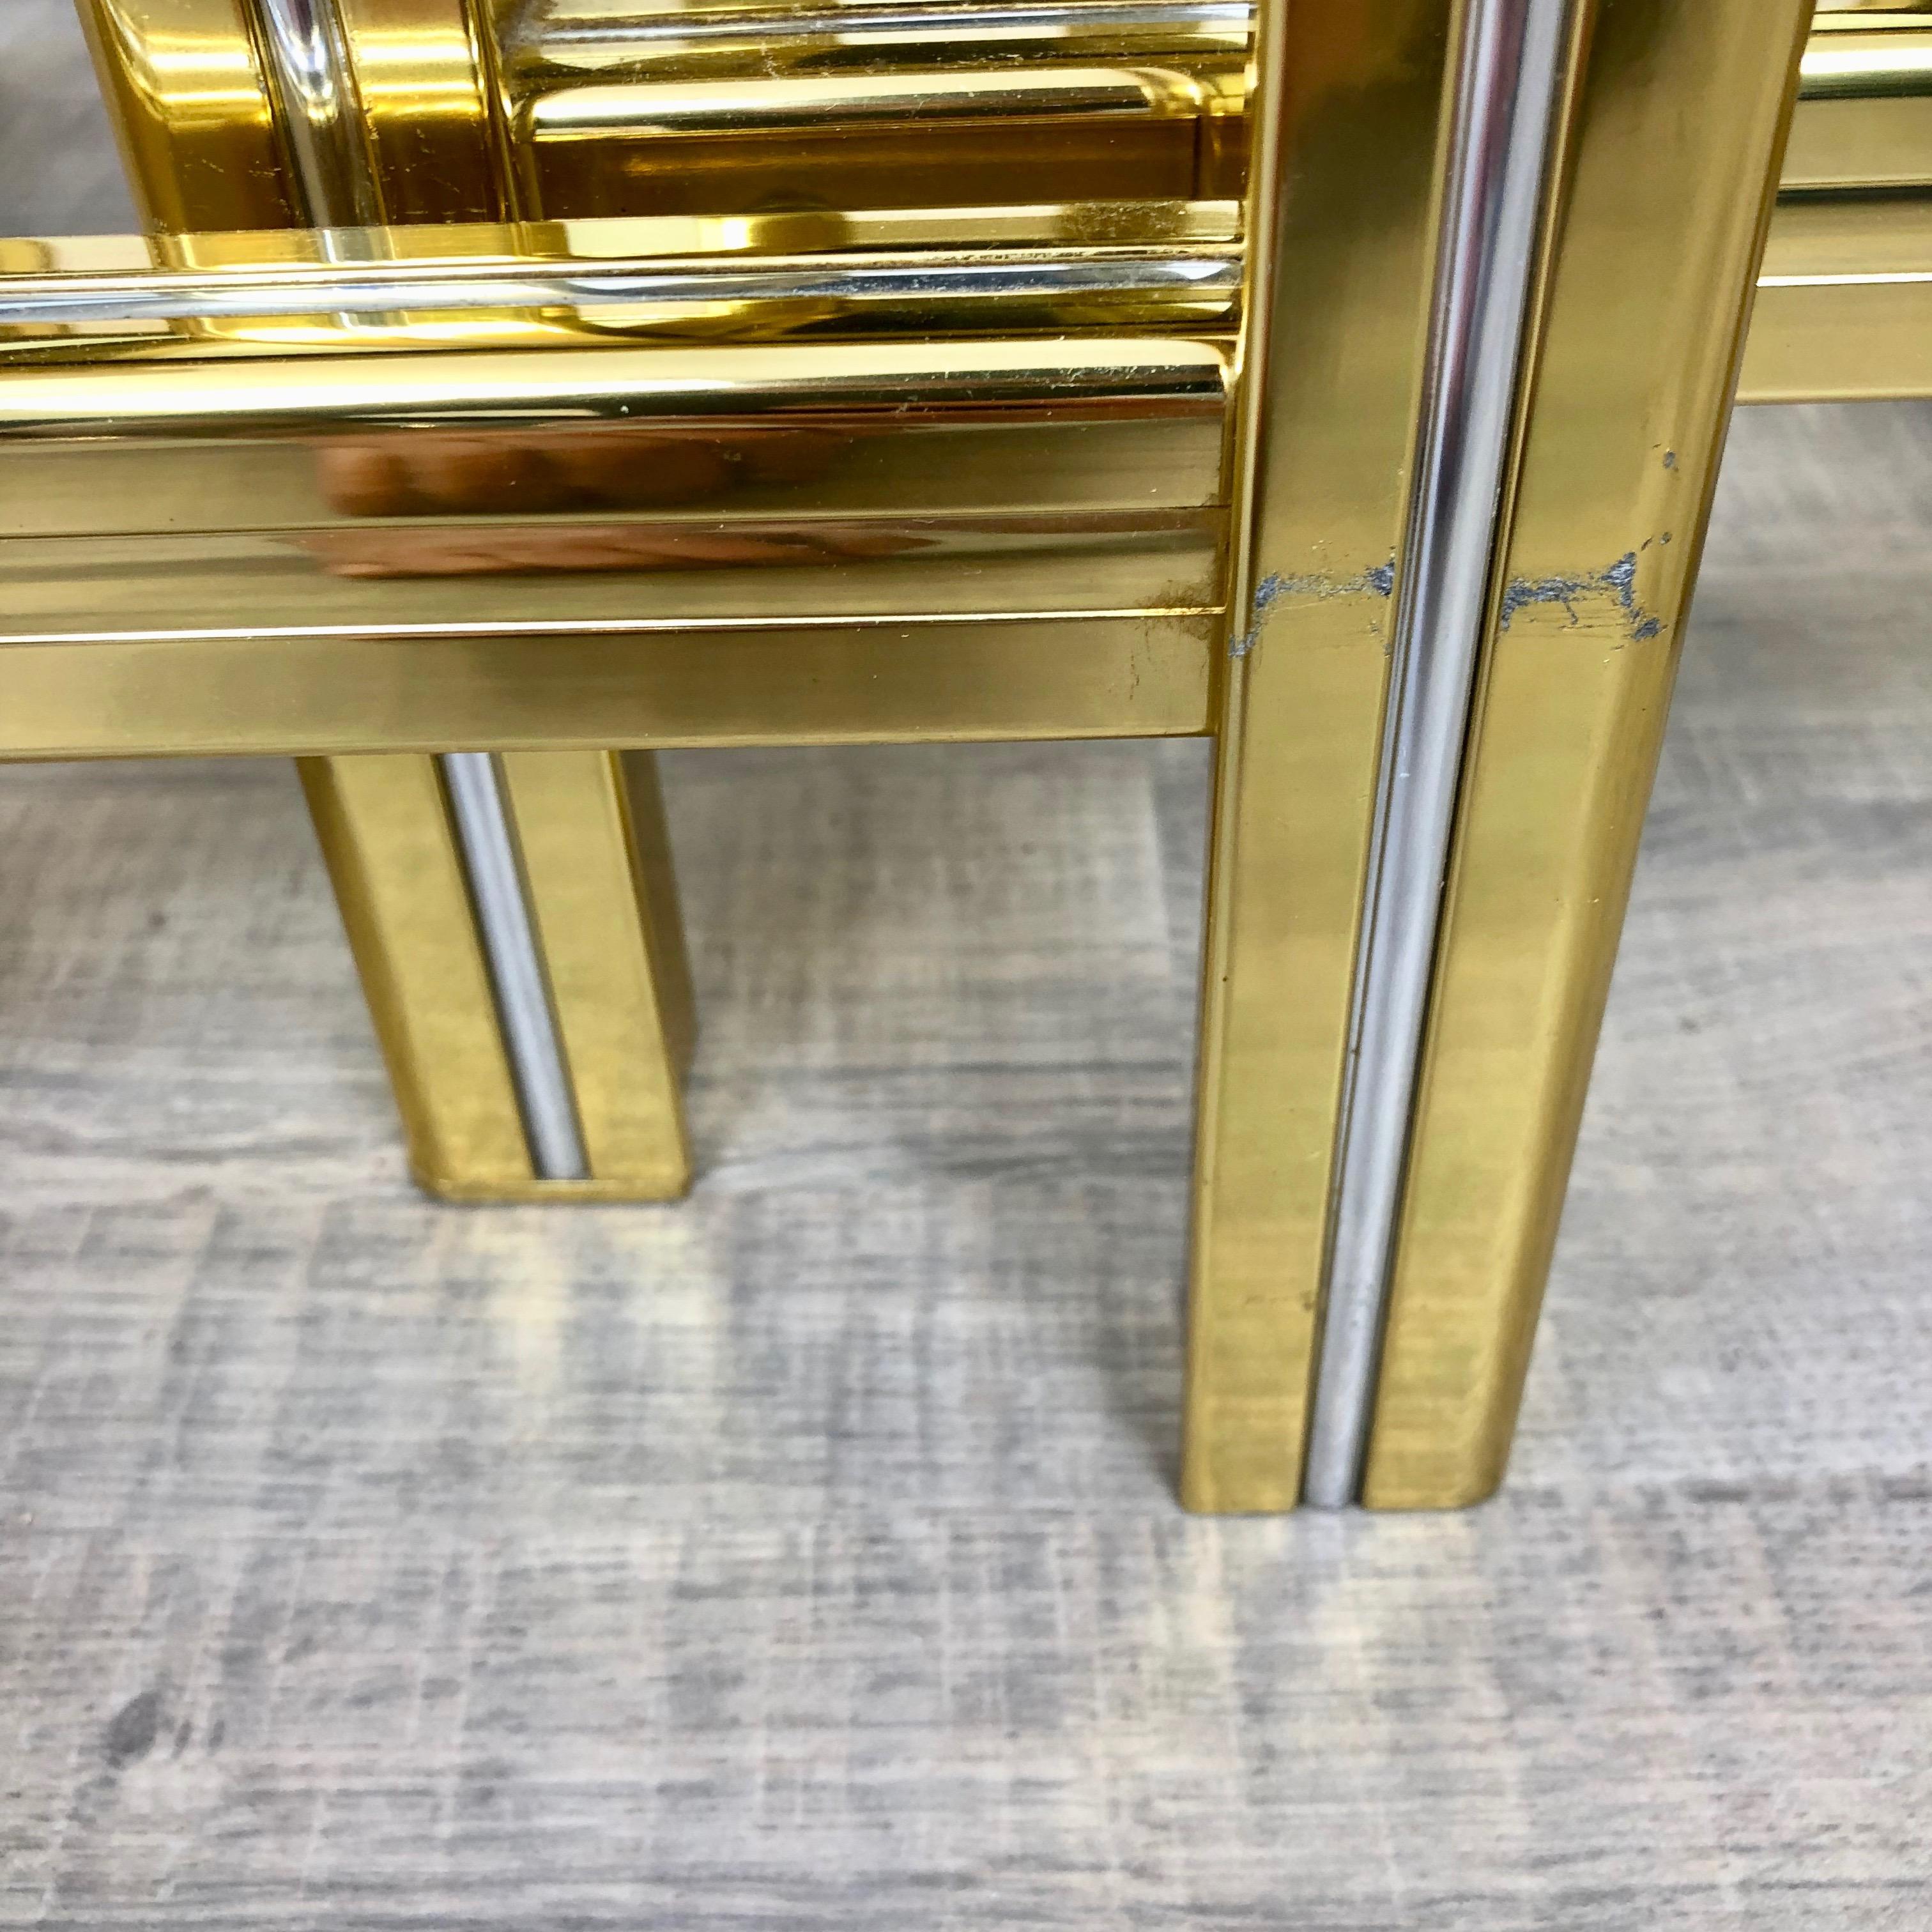 Tris of Increasing Dimensions Side Coffe Table in Brass, Glass and Chrome, 1970s For Sale 3